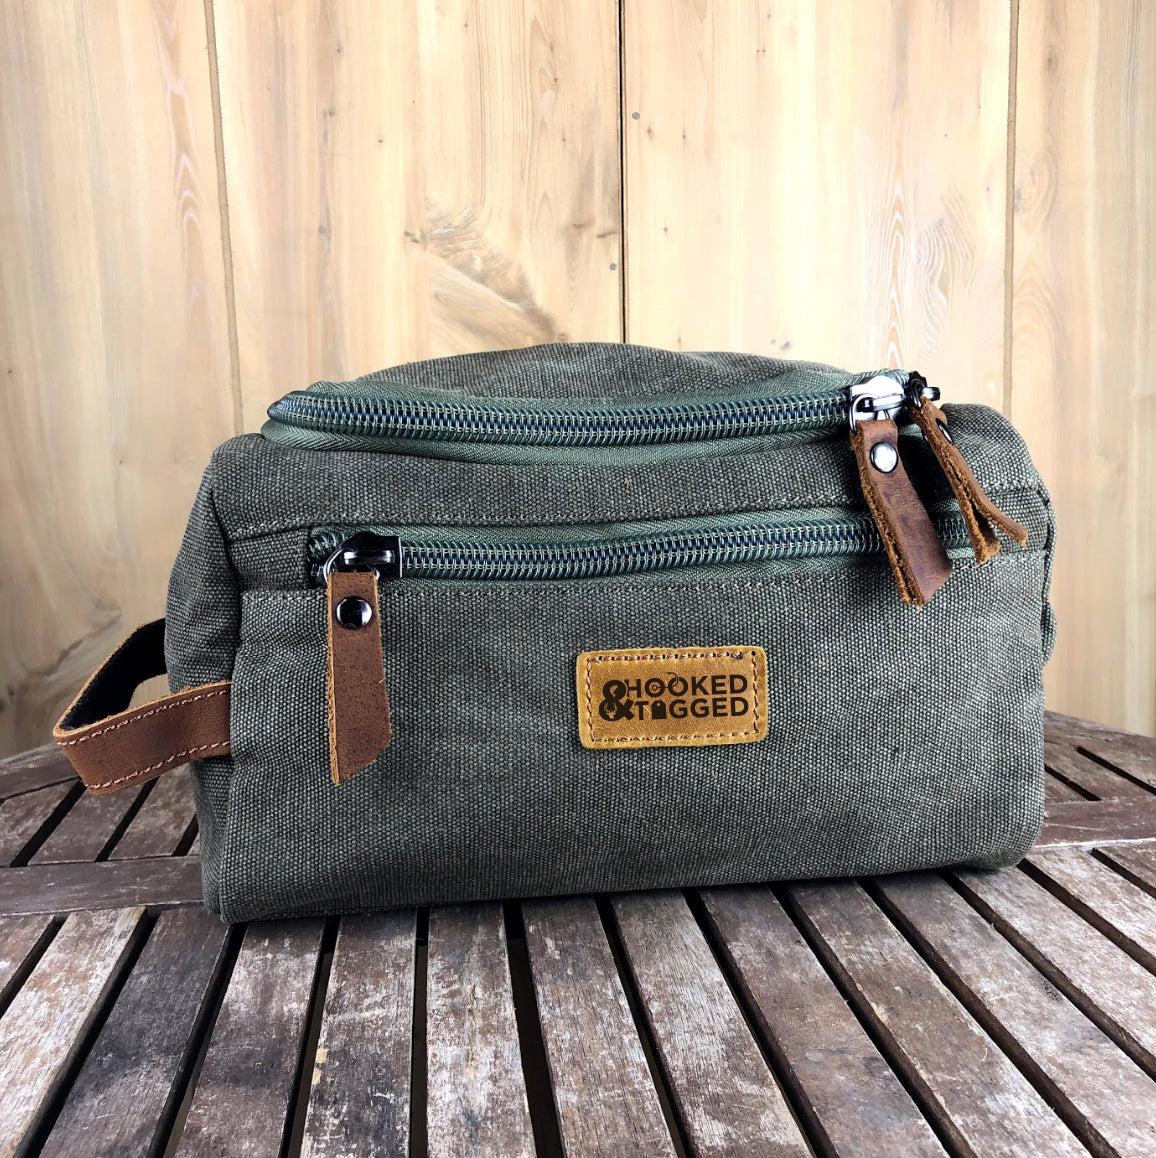 Waxed Canvas Toiletry Bag - Green